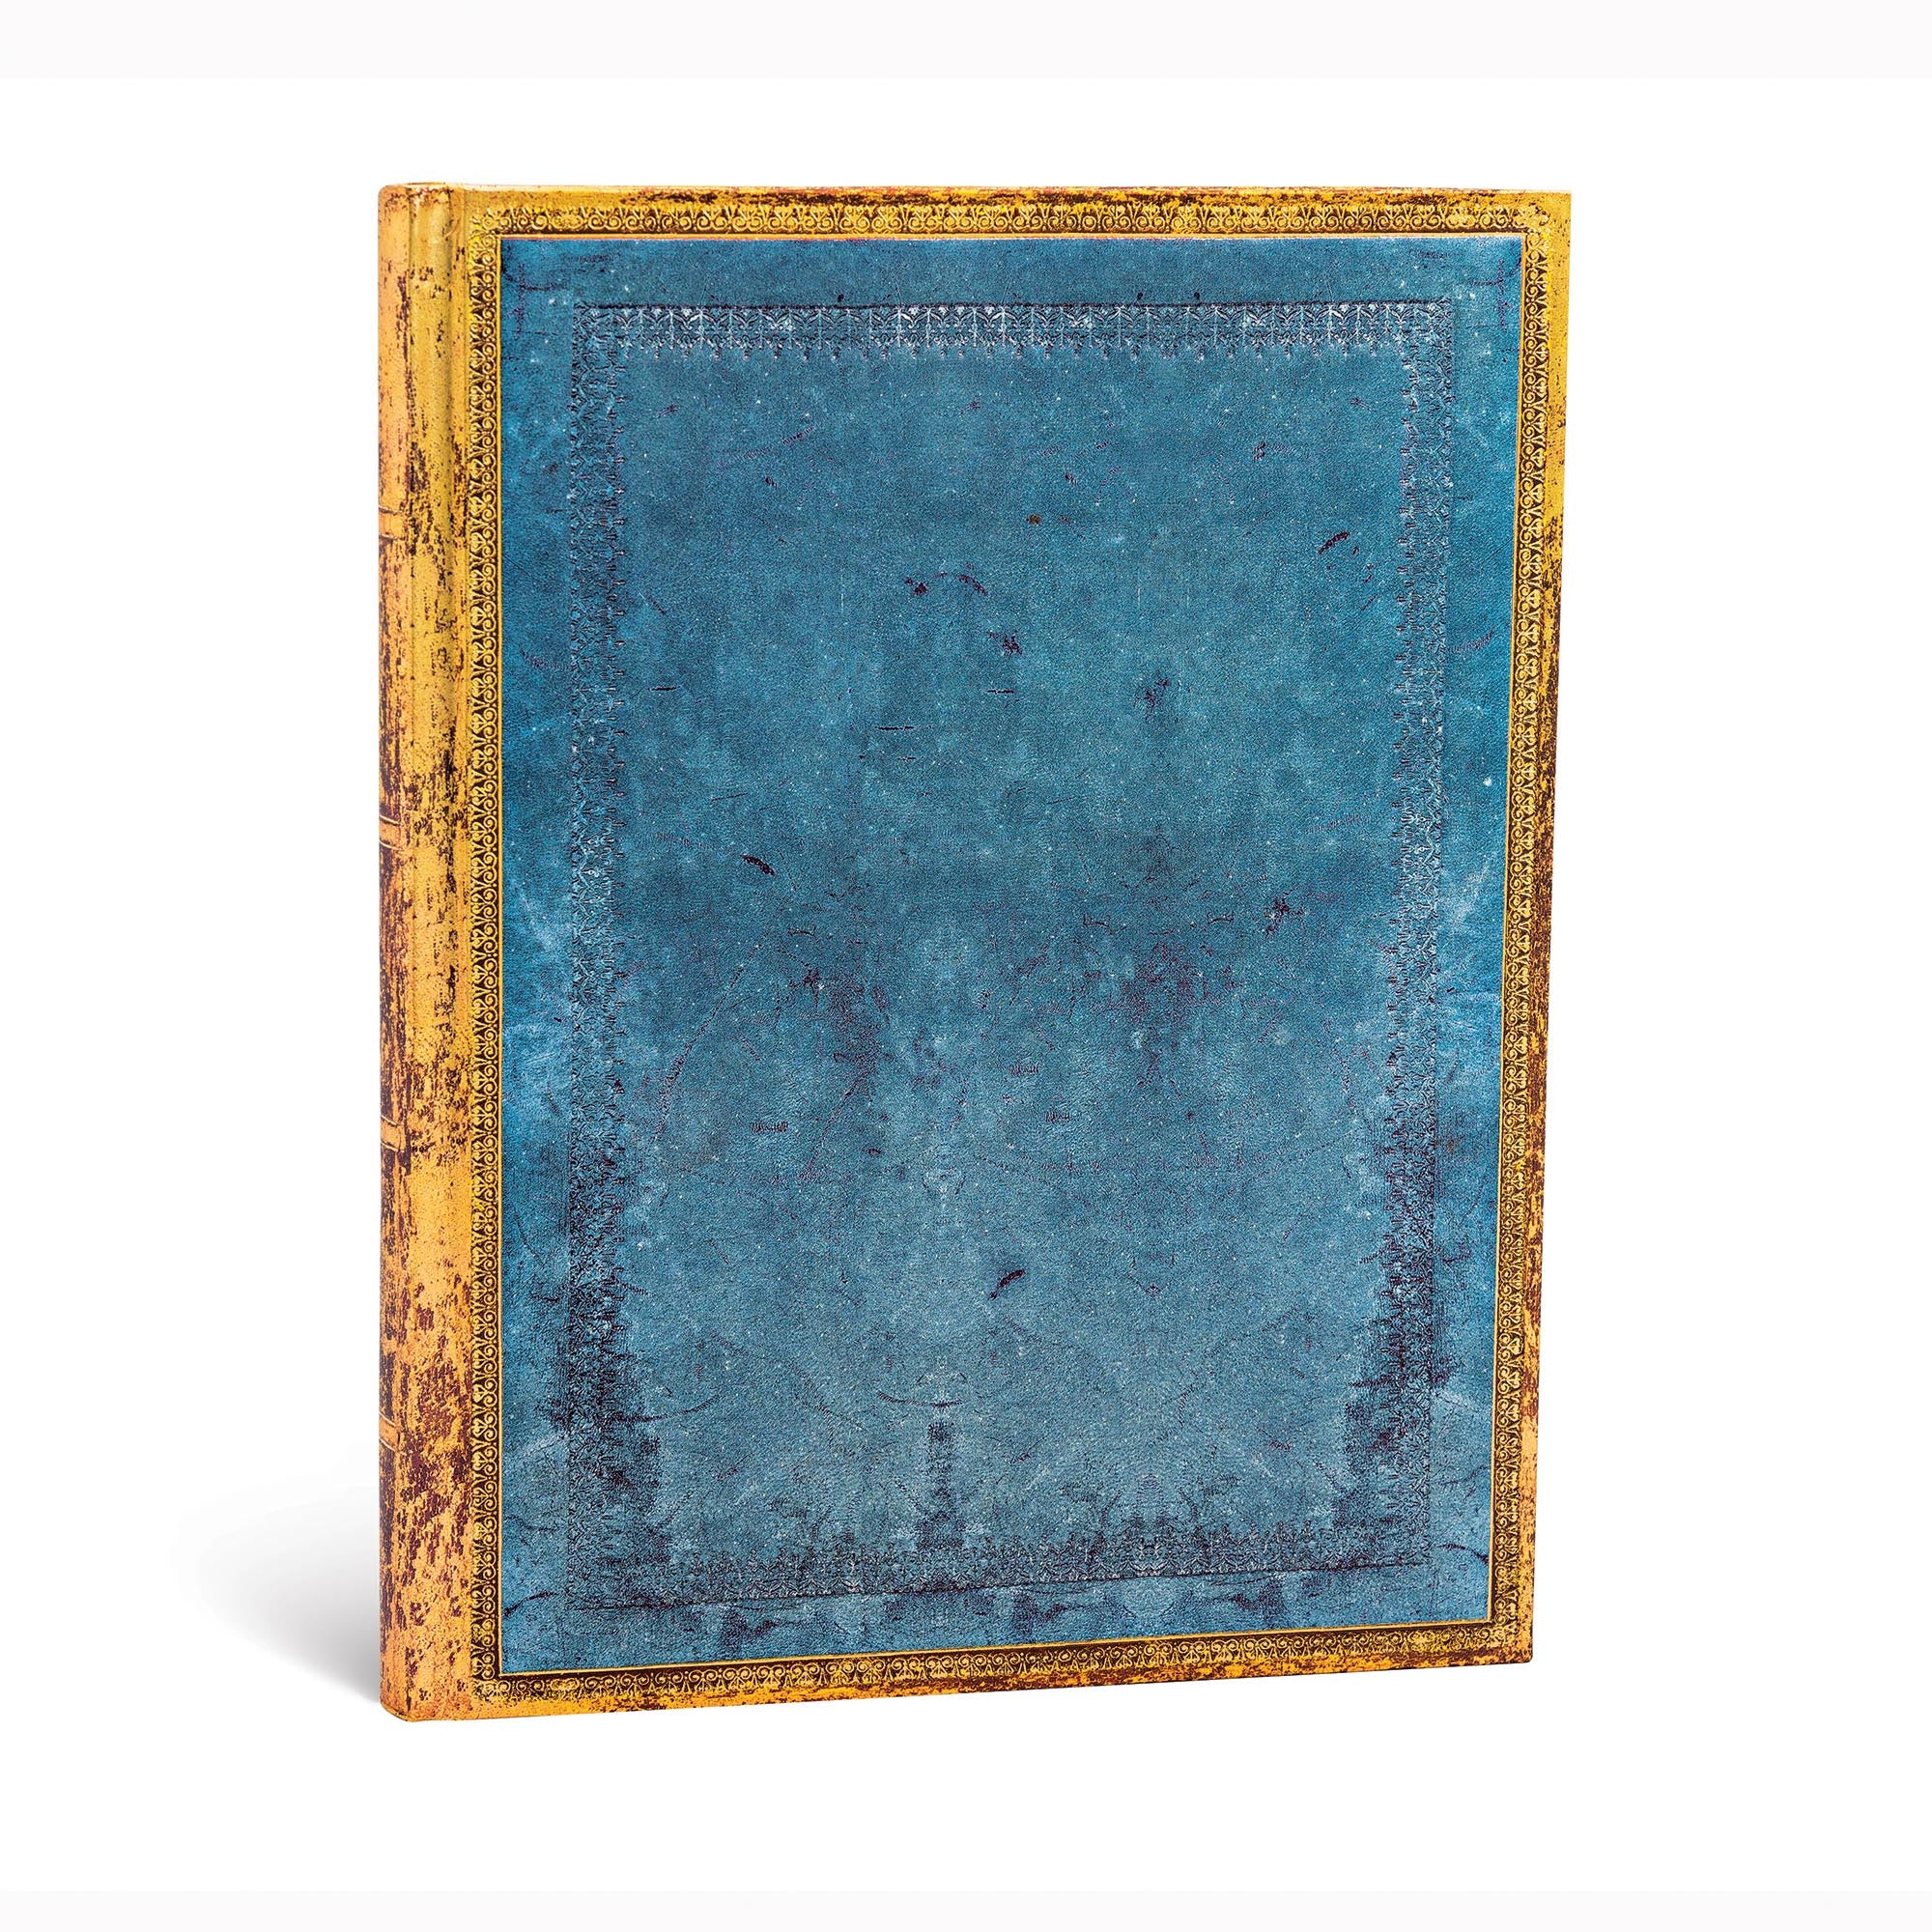 Paperblanks Riviera Lined Ultra Hardcover Journal    